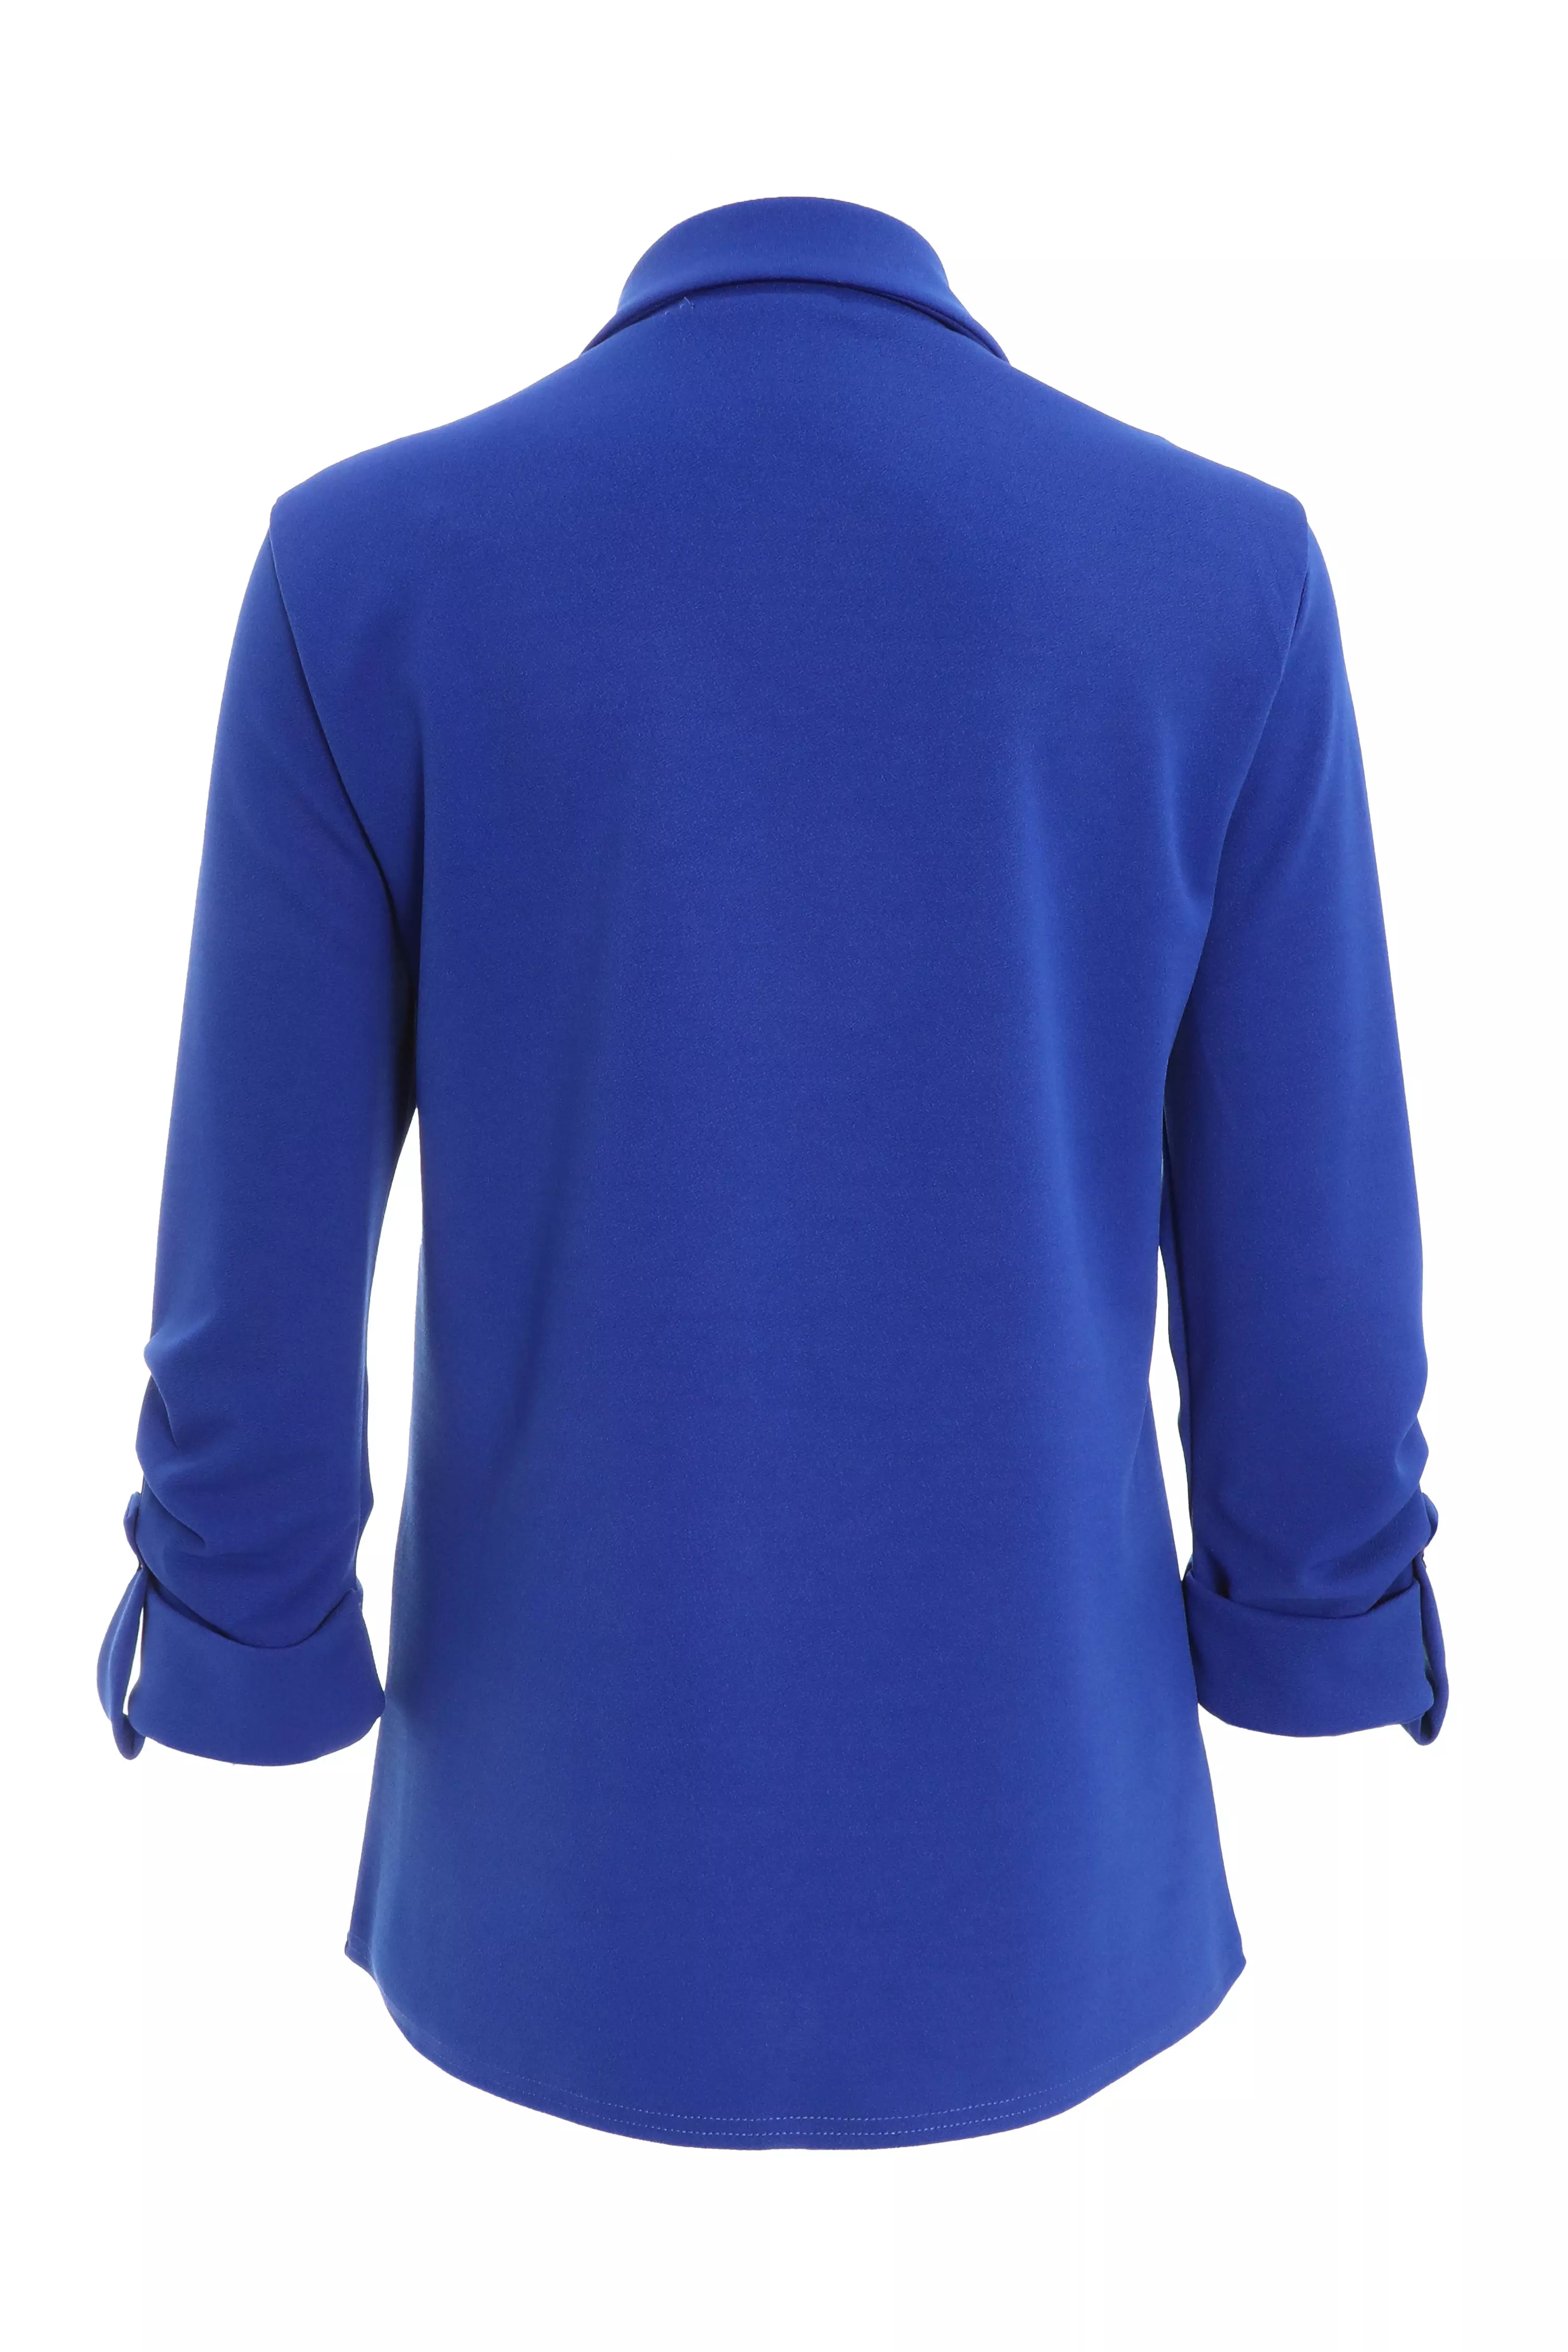 Royal Blue Ruched Sleeve Tailored Blazer